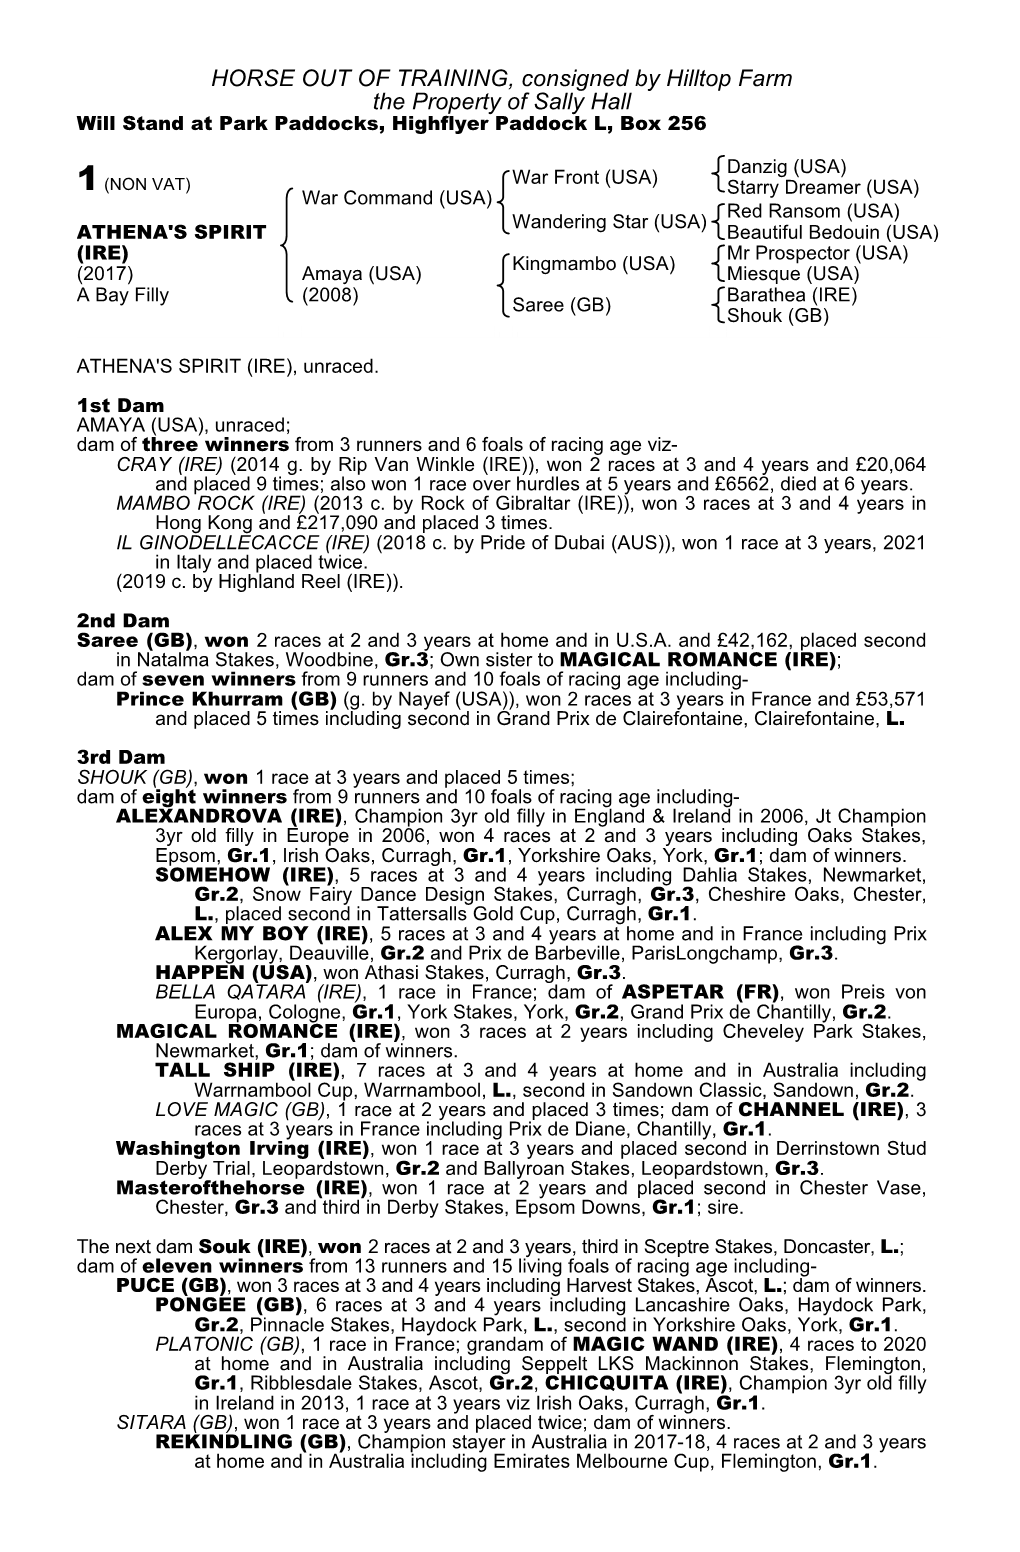 HORSE out of TRAINING, Consigned by Hilltop Farm the Property of Sally Hall Will Stand at Park Paddocks, Highflyer Paddock L, Box 256